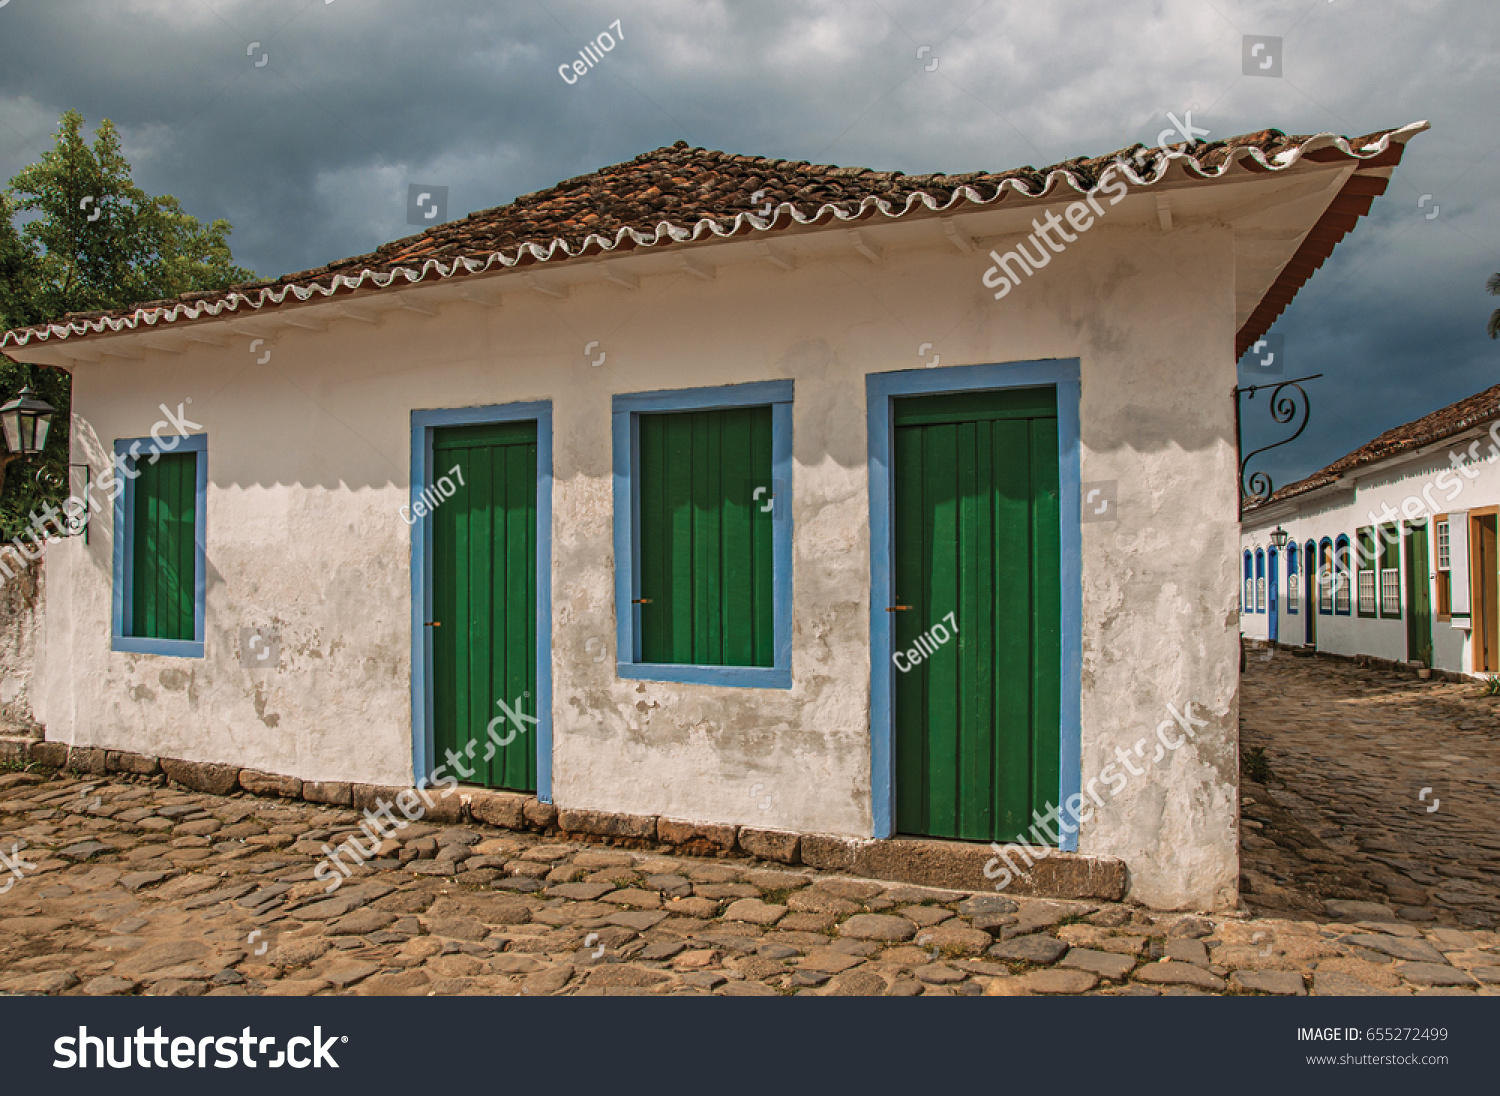 Overview of old house and alleyway with cobblestone on cloudy day in Paraty, an amazing and historic town totally preserved in the coast of the Rio de Janeiro State, southwestern Brazil #655272499